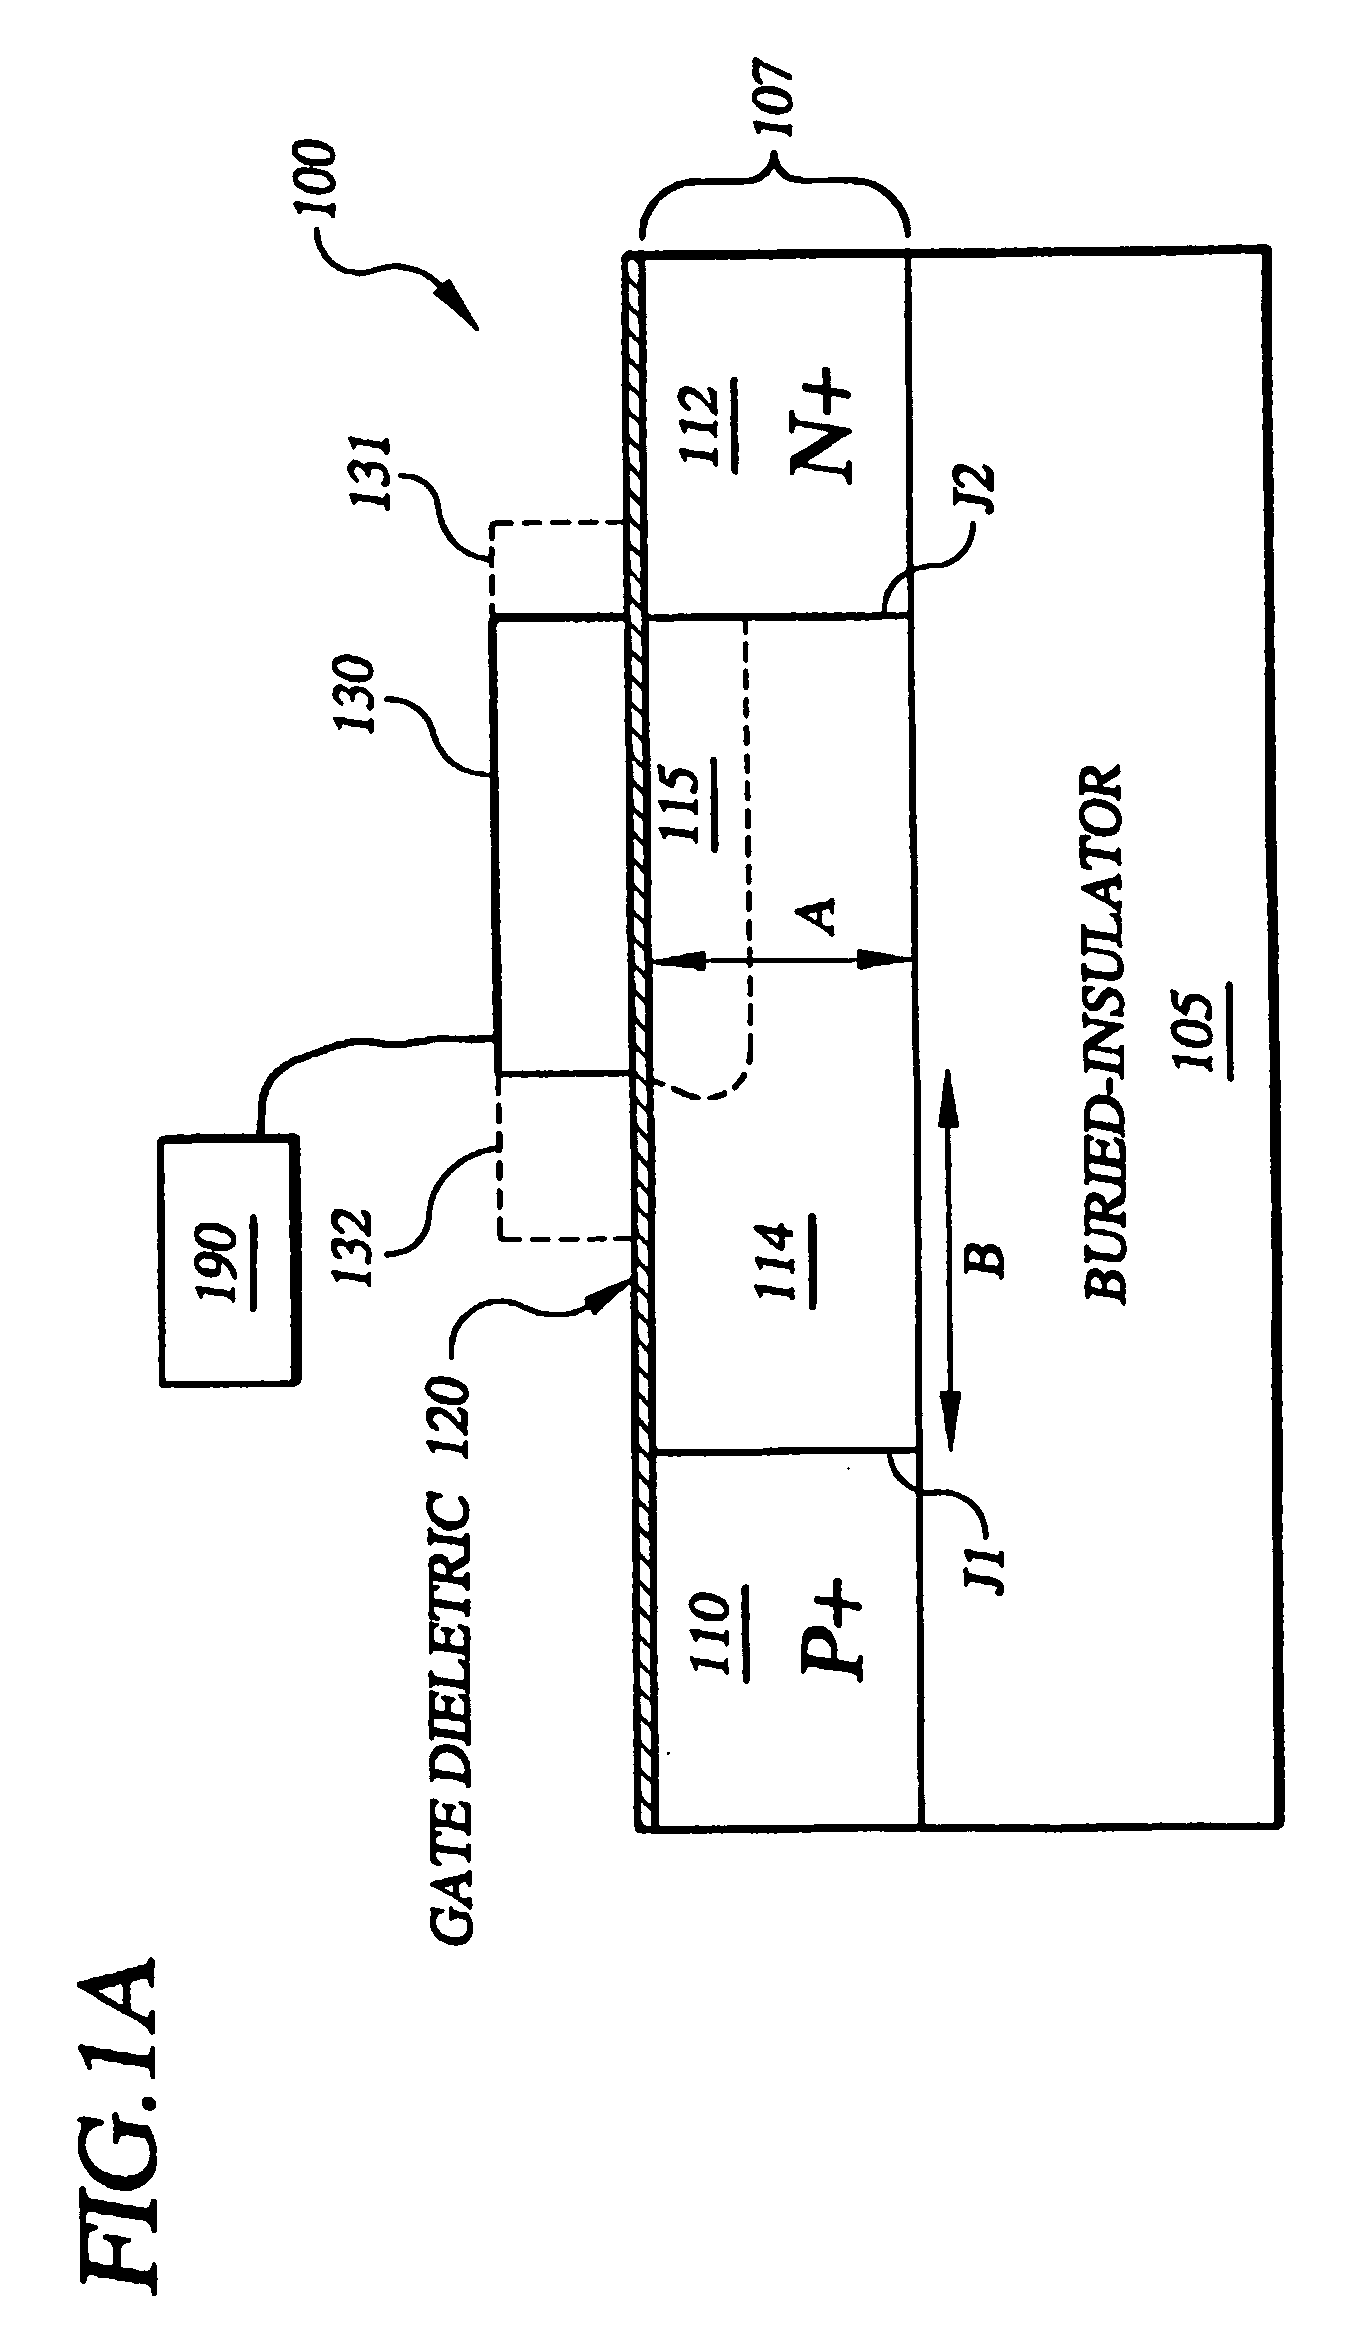 Insulated-gate semiconductor device and approach involving junction-induced intermediate region